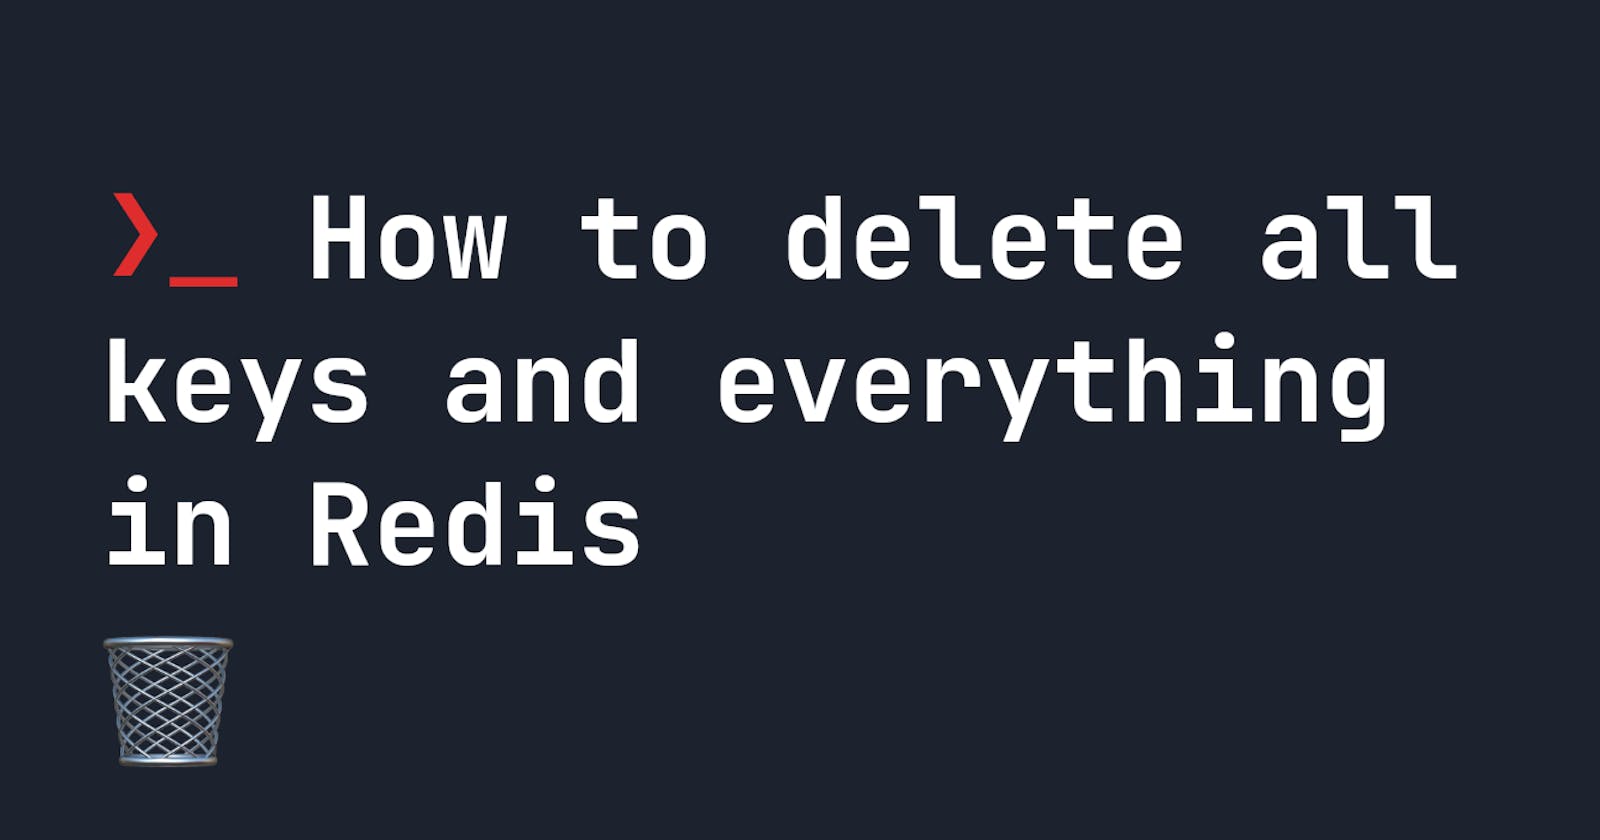 How to delete all keys and everything in Redis